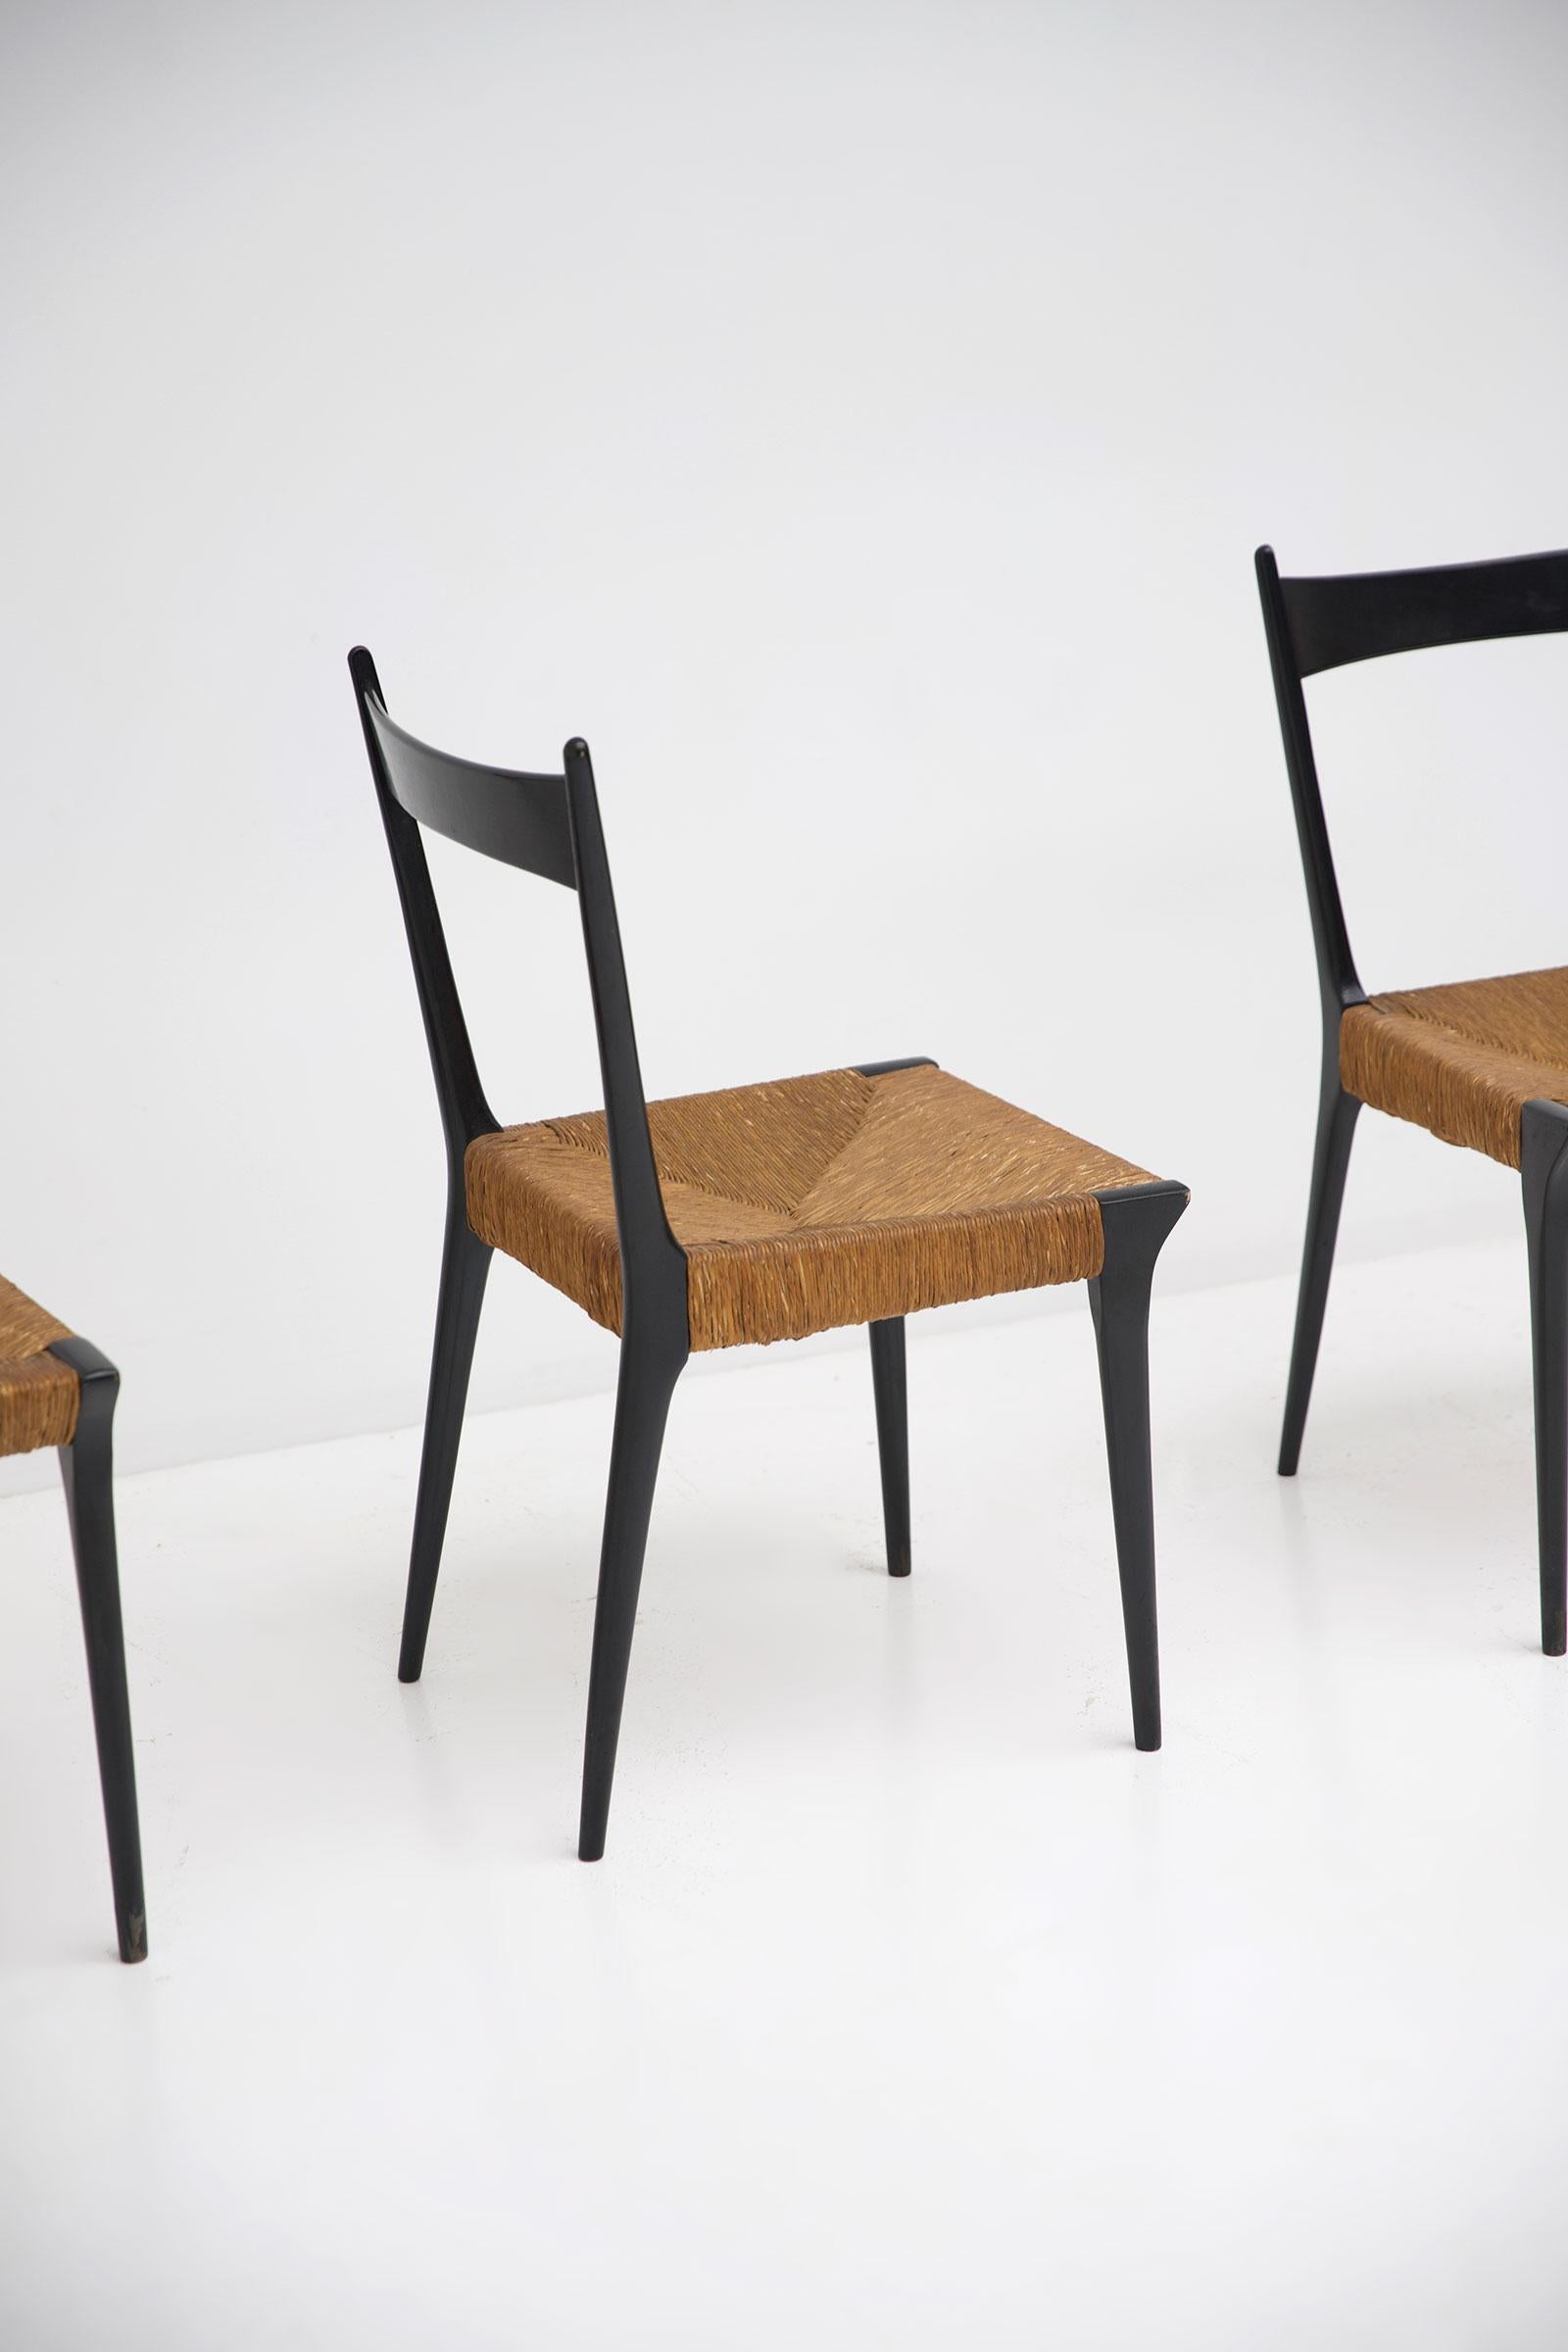 Mid-Century Modern, set of six 'S2' chairs designed by Alfred Hendrickx in 1958 for Belform.
The chairs are made of black lacquered cherry wood and have woven cane seats. The elegant black frame with the cane seat is a nice example of sophisticated